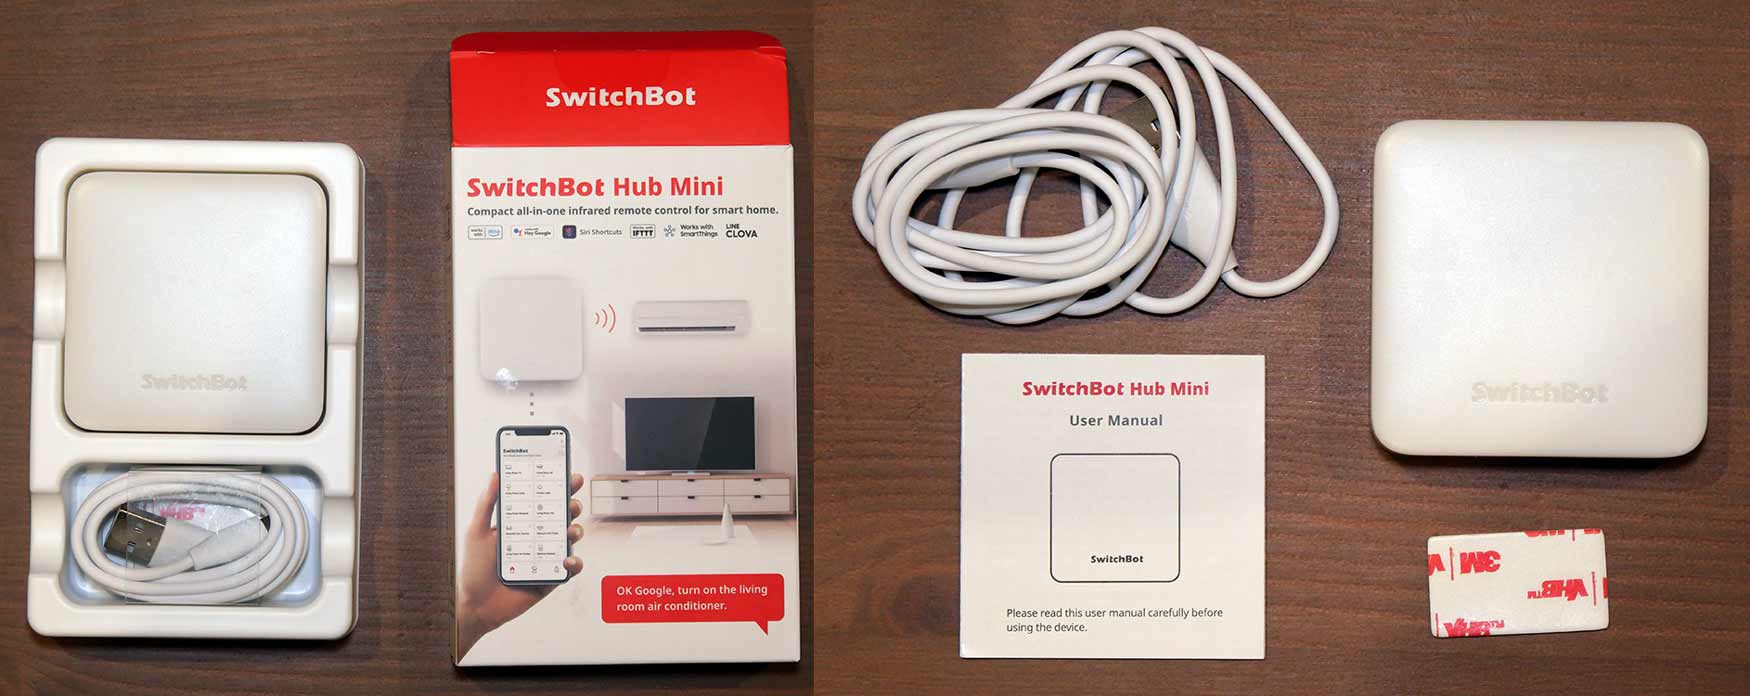 Two photos. 1: SwitchBot Hub mini in the inner packaging, along with a packaged microUSB power cable, alongside the outer box. 2: Photo showing the SwitchBot Hub Mini, the user manual, a USB power cable and a double-sided 3M adhesive pad.